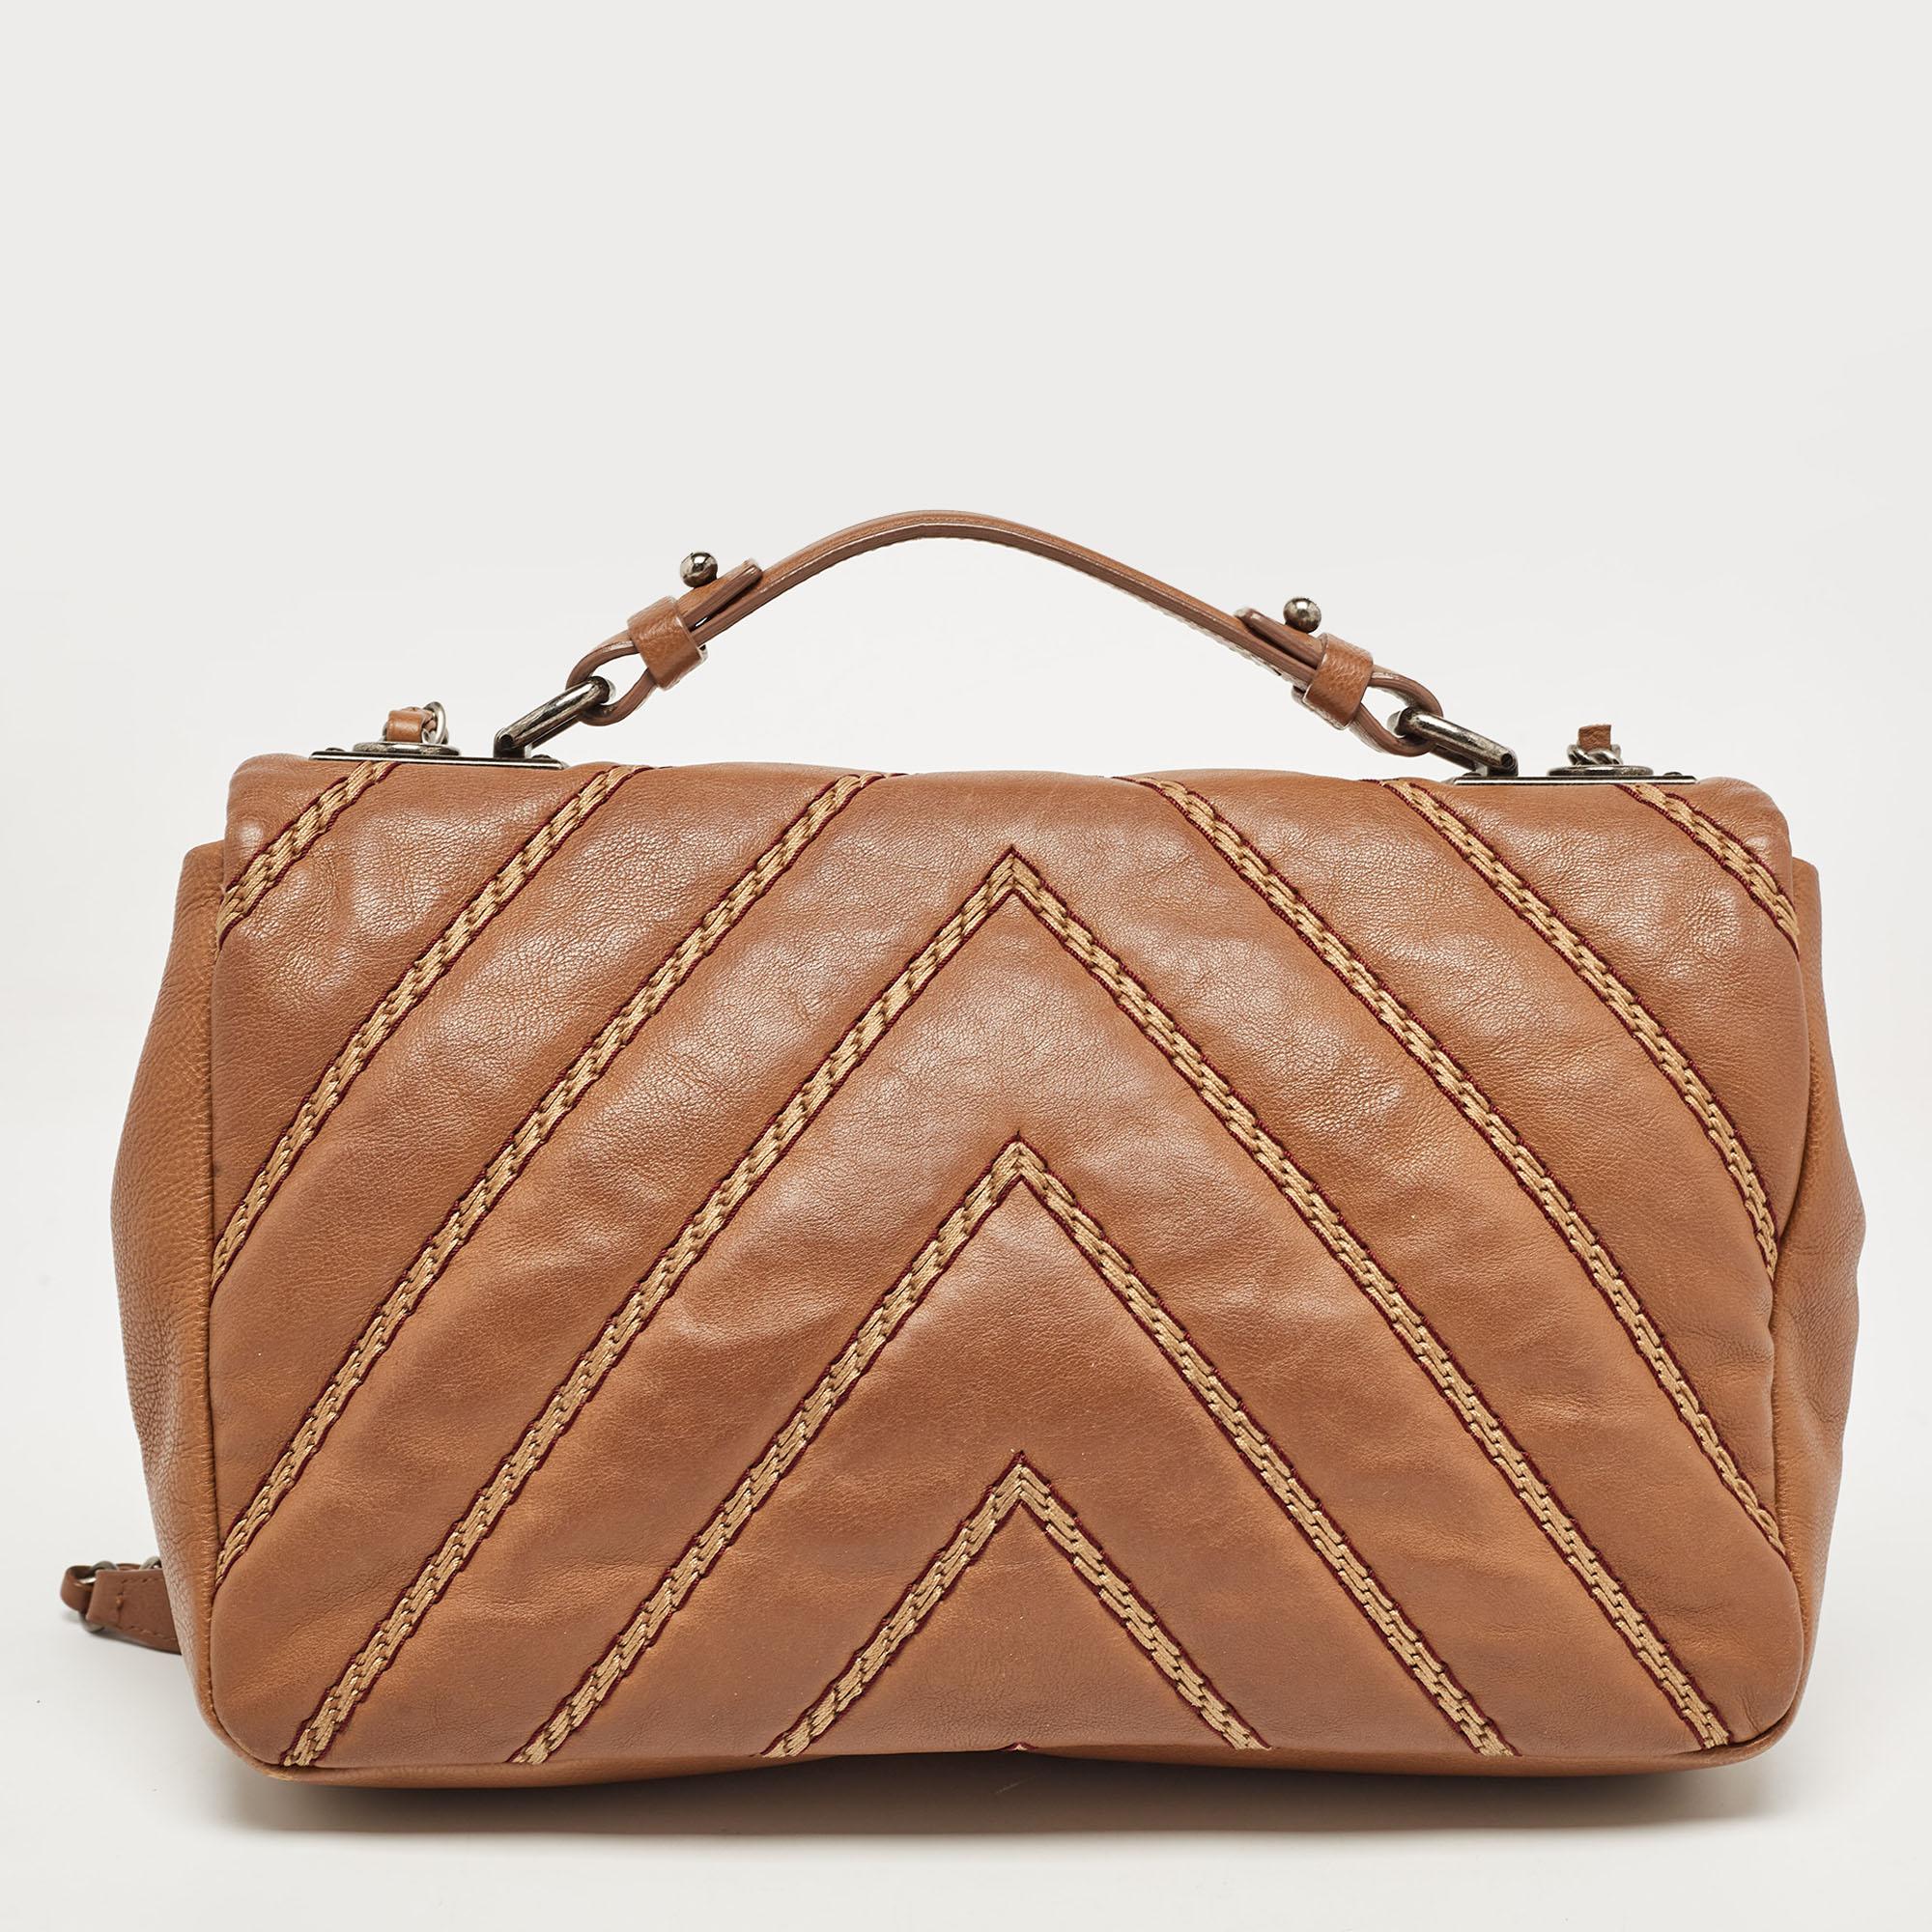 Chanel Brown Chevron Stitched Leather Classic Top Handle Bag For Sale 3